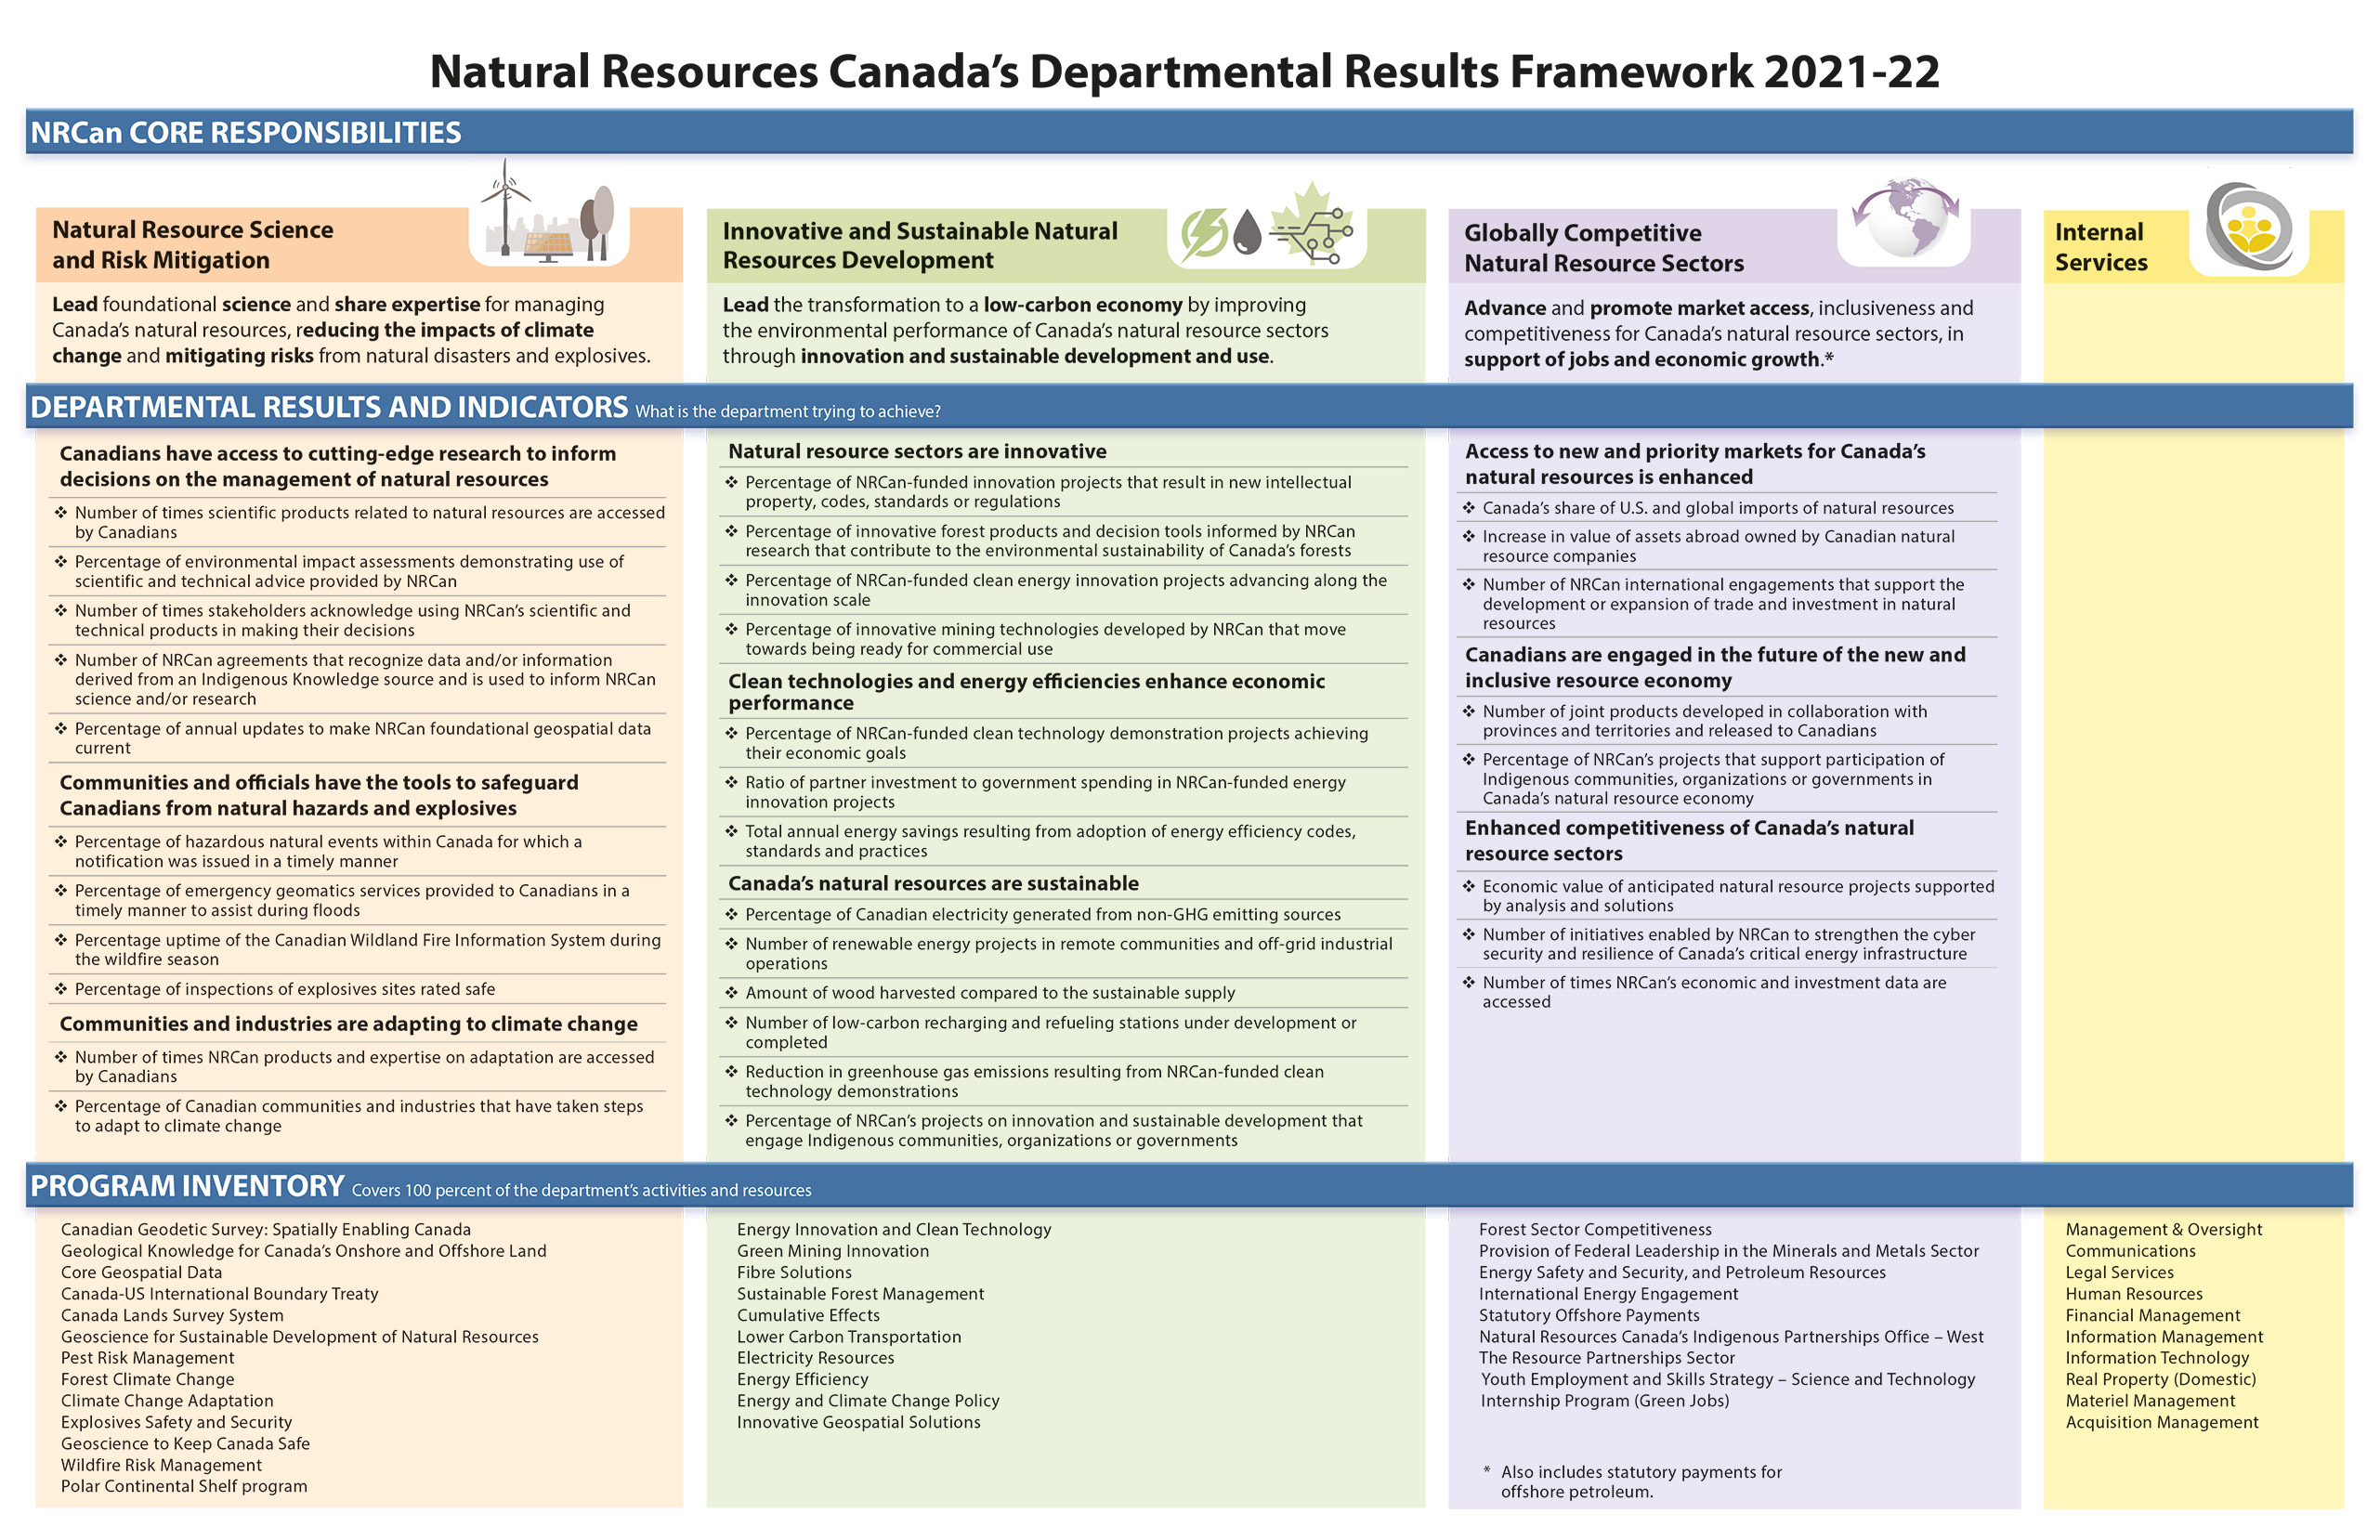 Infographic showing Natural Resources Canada's Departmental Results Frameword for 2021-22